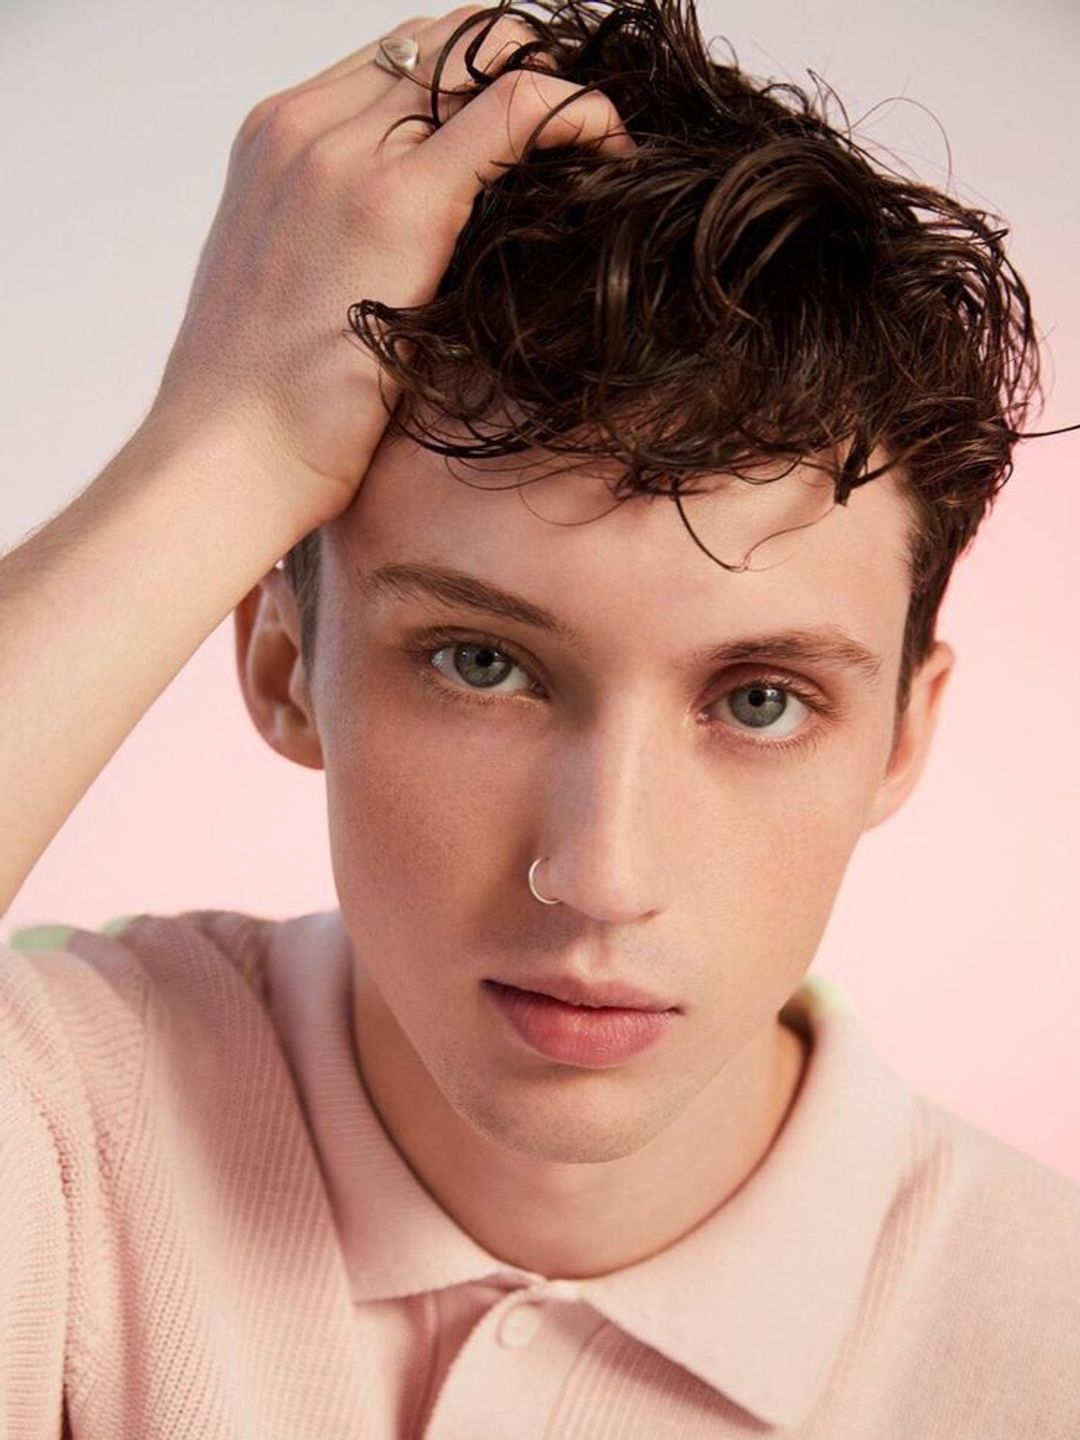 Troye Sivan does he have kids